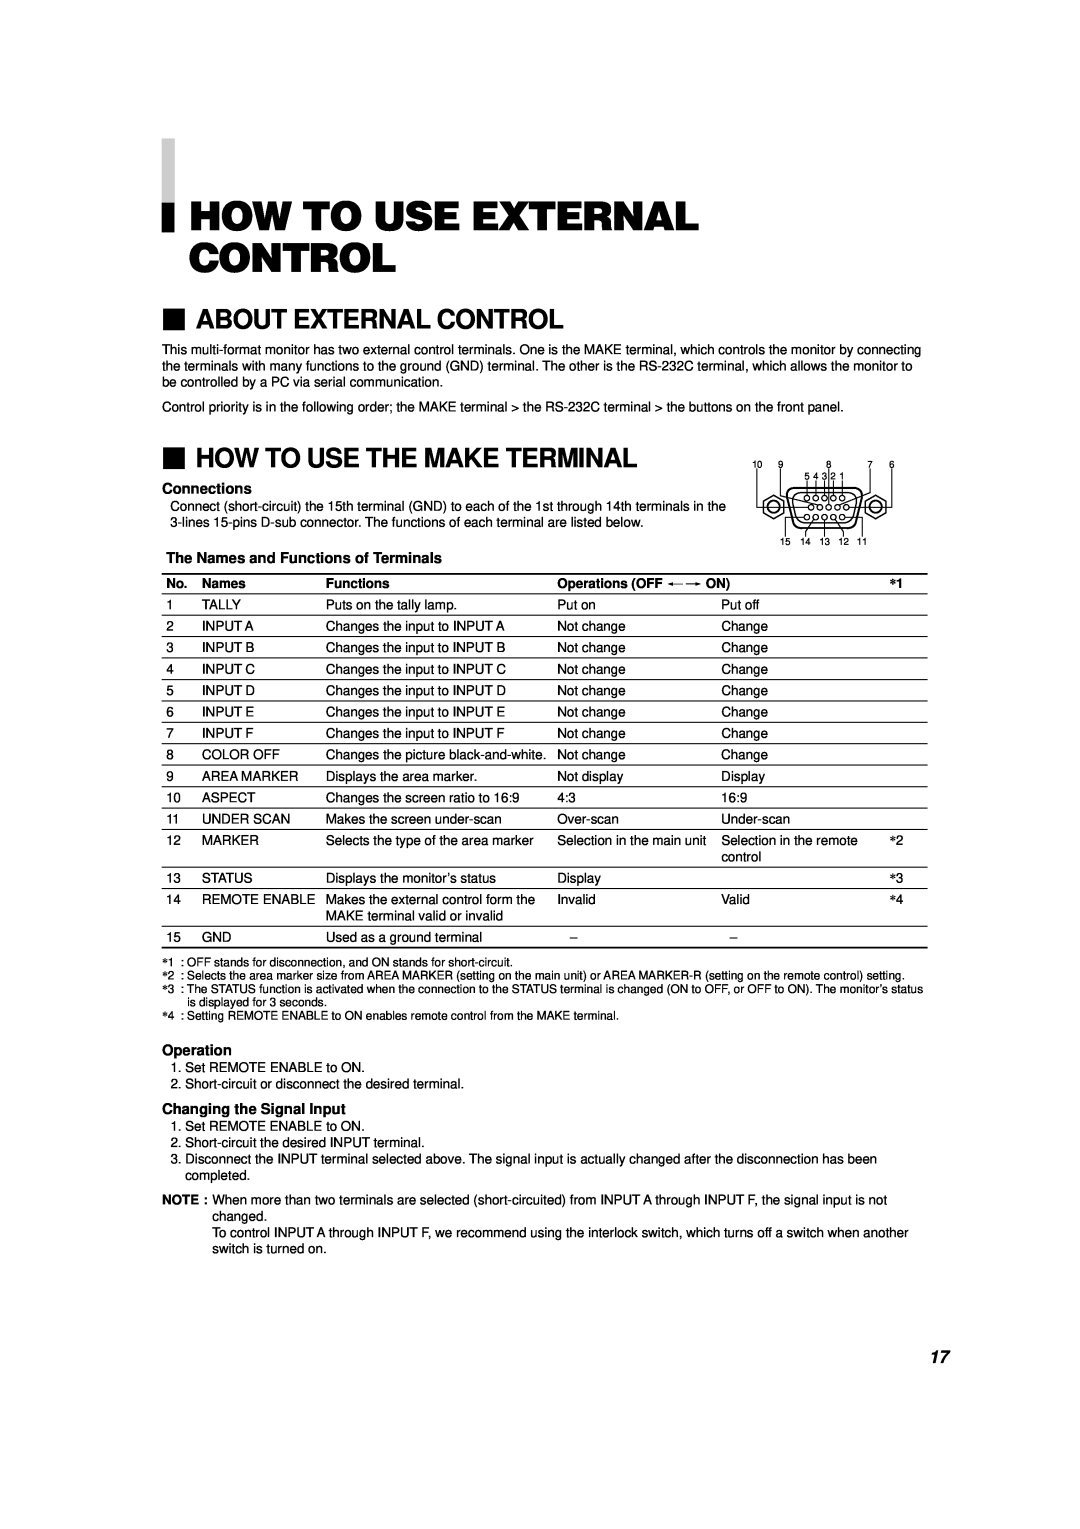 JVC V1700CG How To Use External Control,  About External Control,  How To Use The Make Terminal, Connections, Operation 